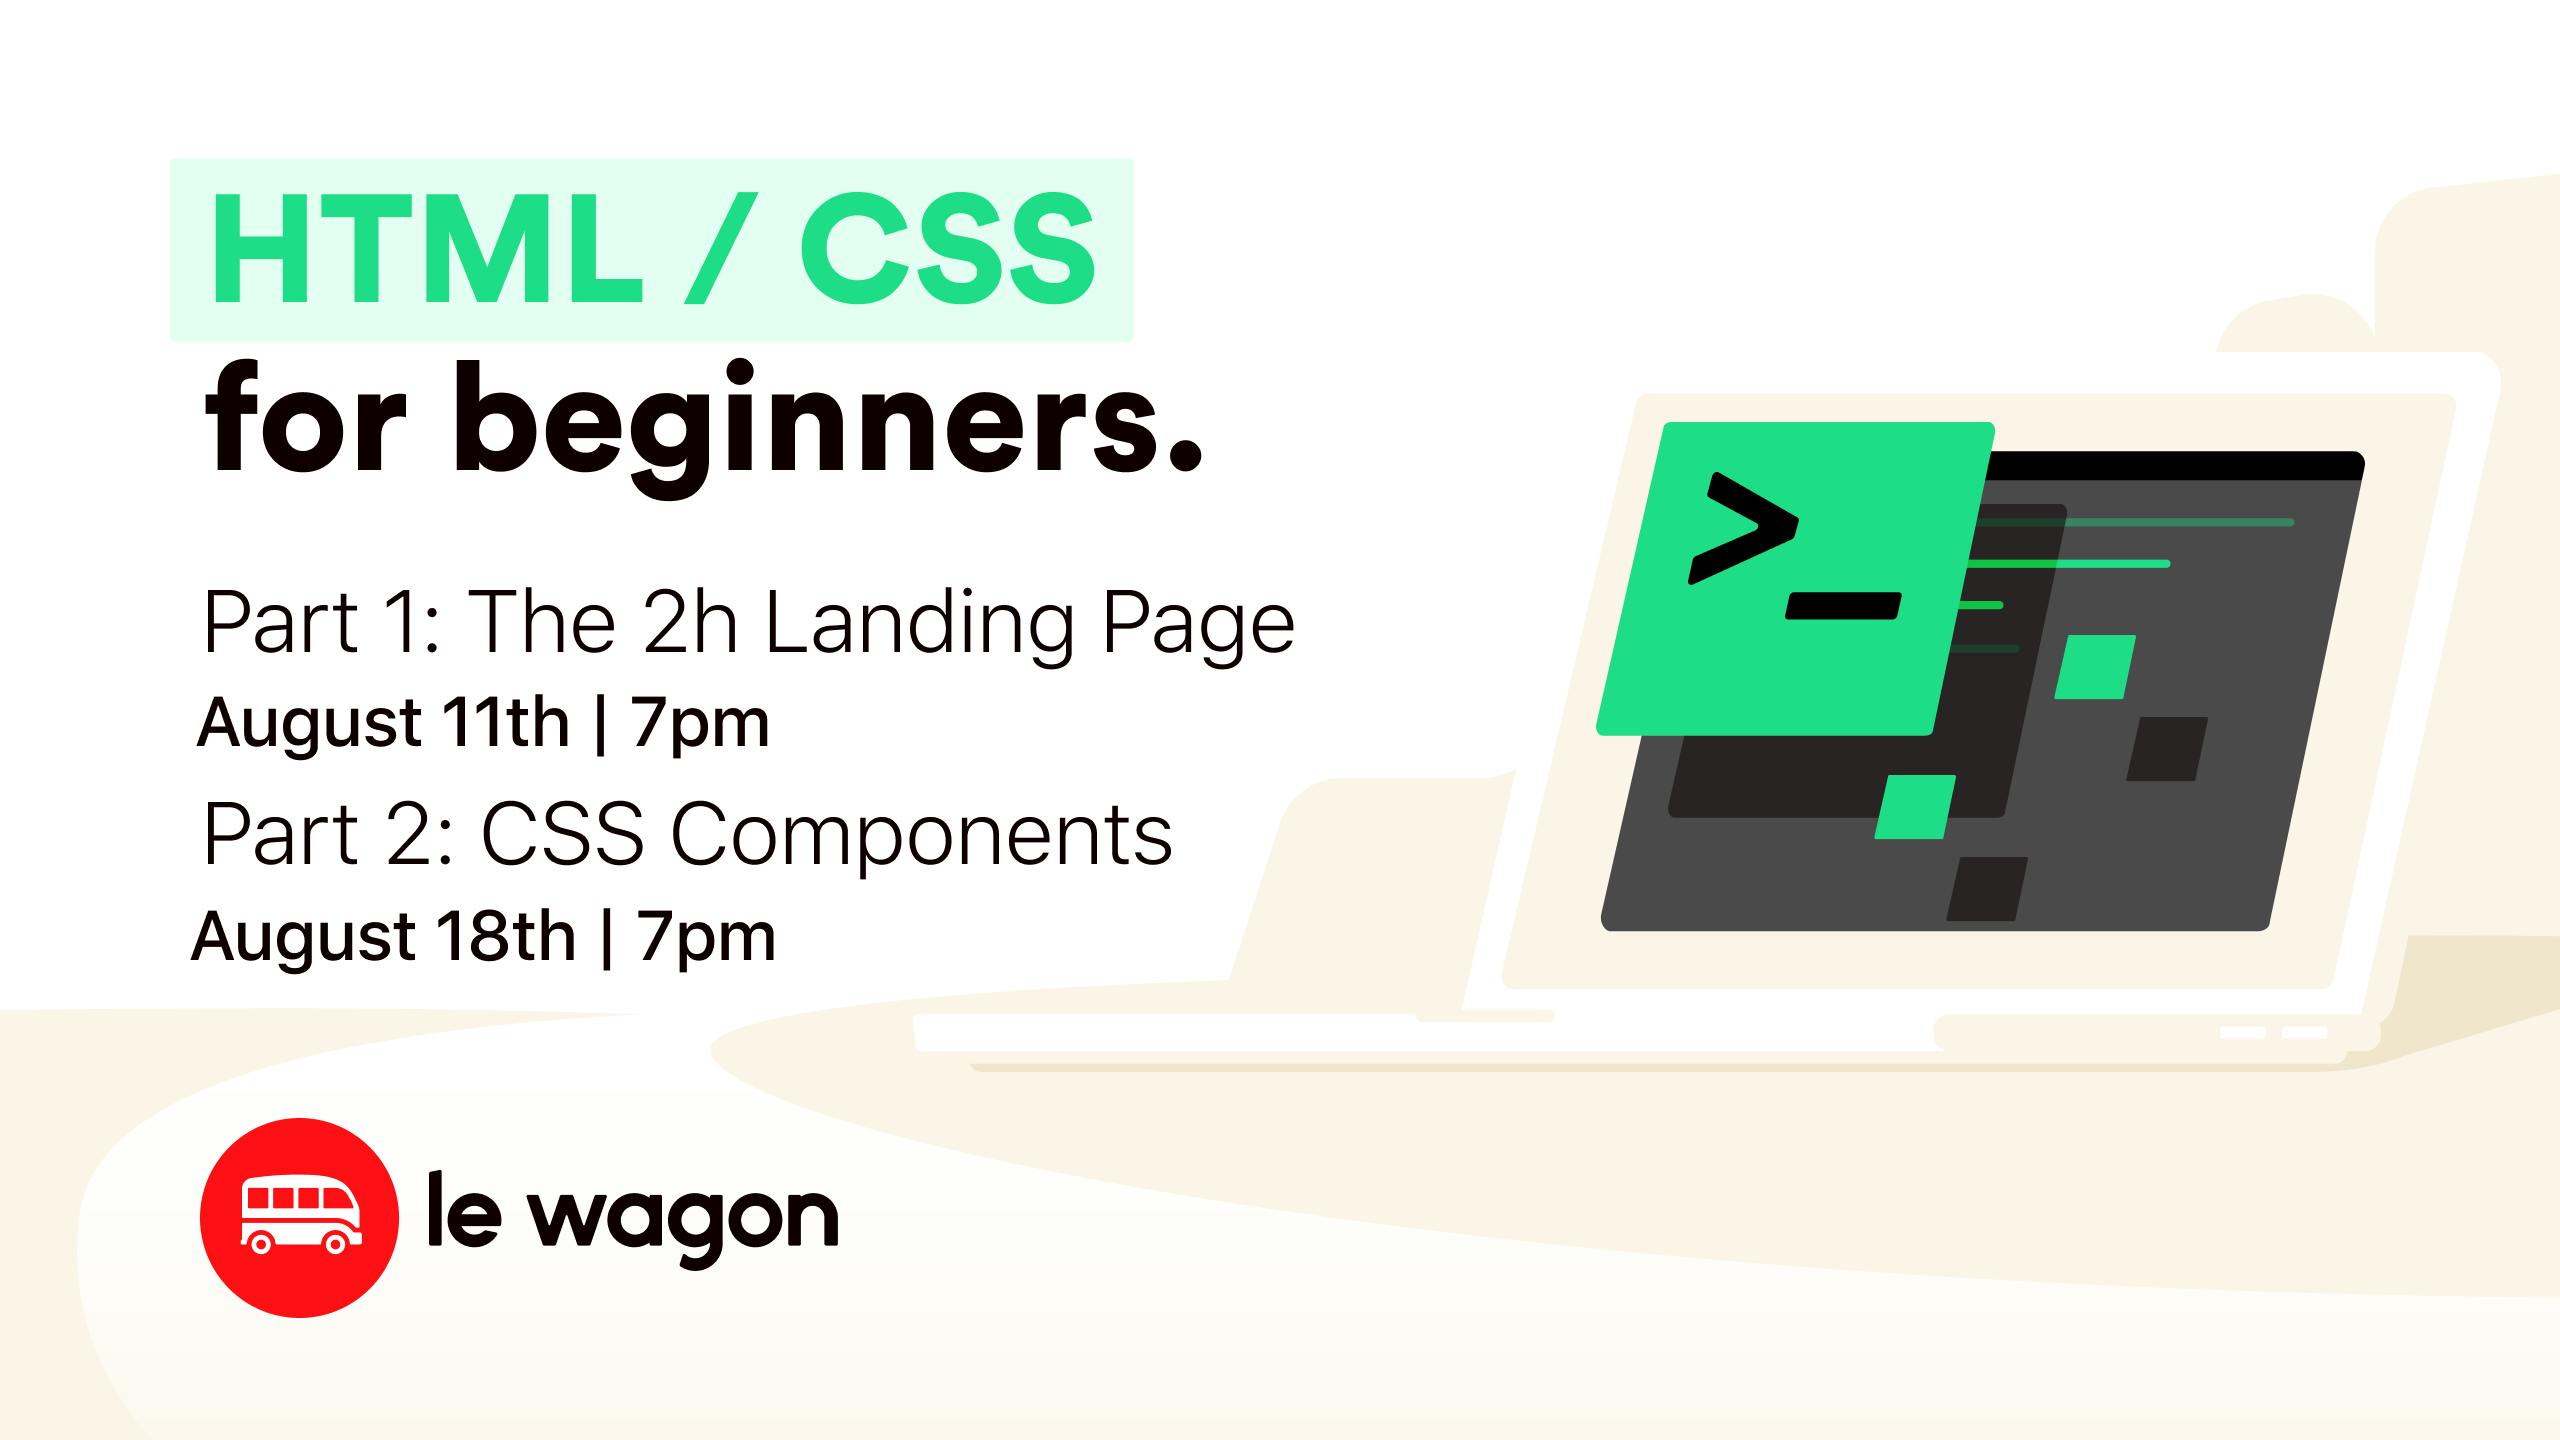 HTML/CSS for Beginners Part 2: CSS Components Design